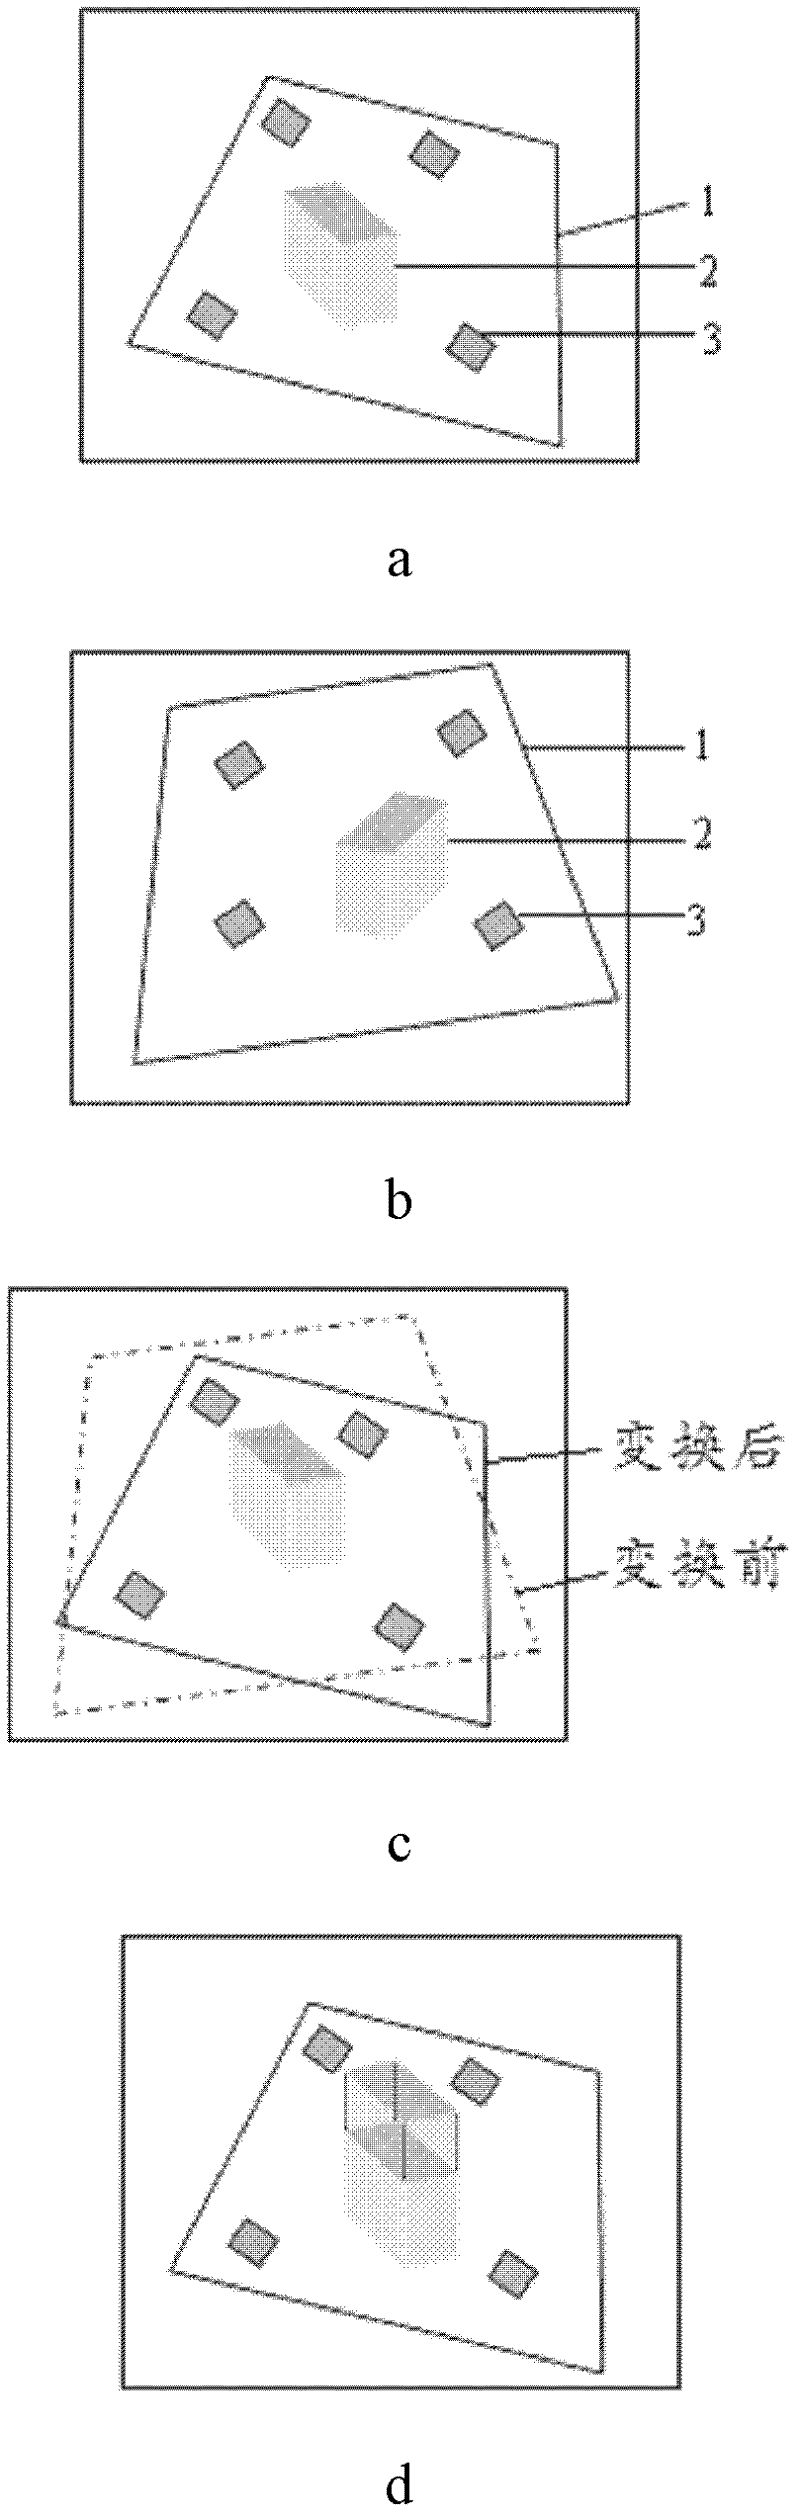 Method for detecting target protruding from plane based on double viewing fields without calibration